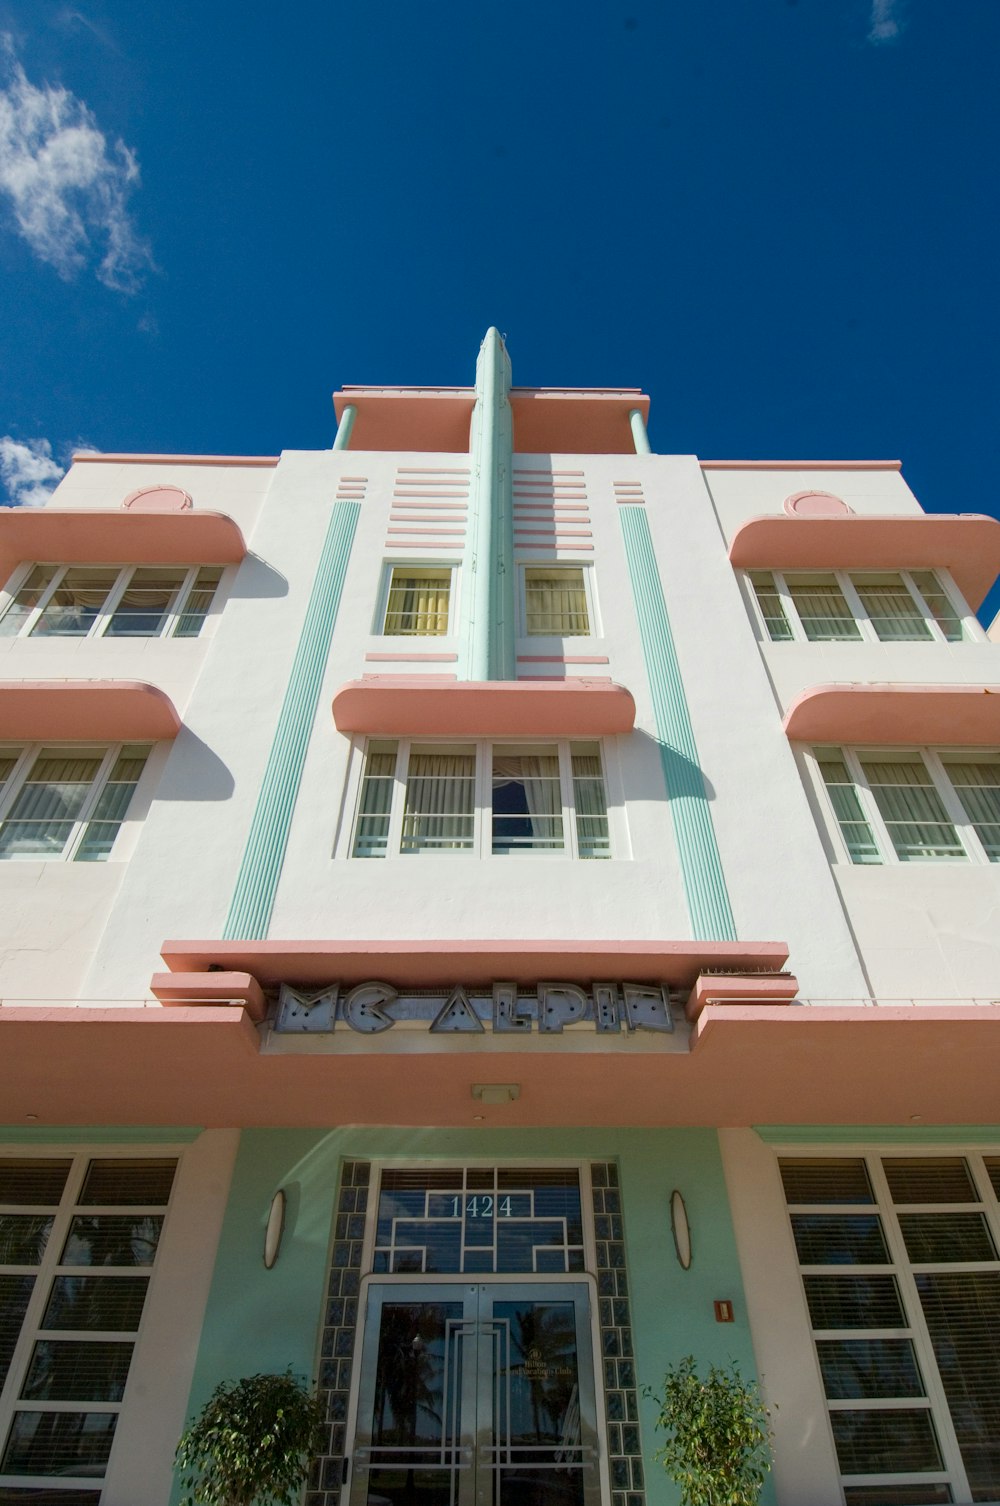 pink and white concrete building under blue sky during daytime